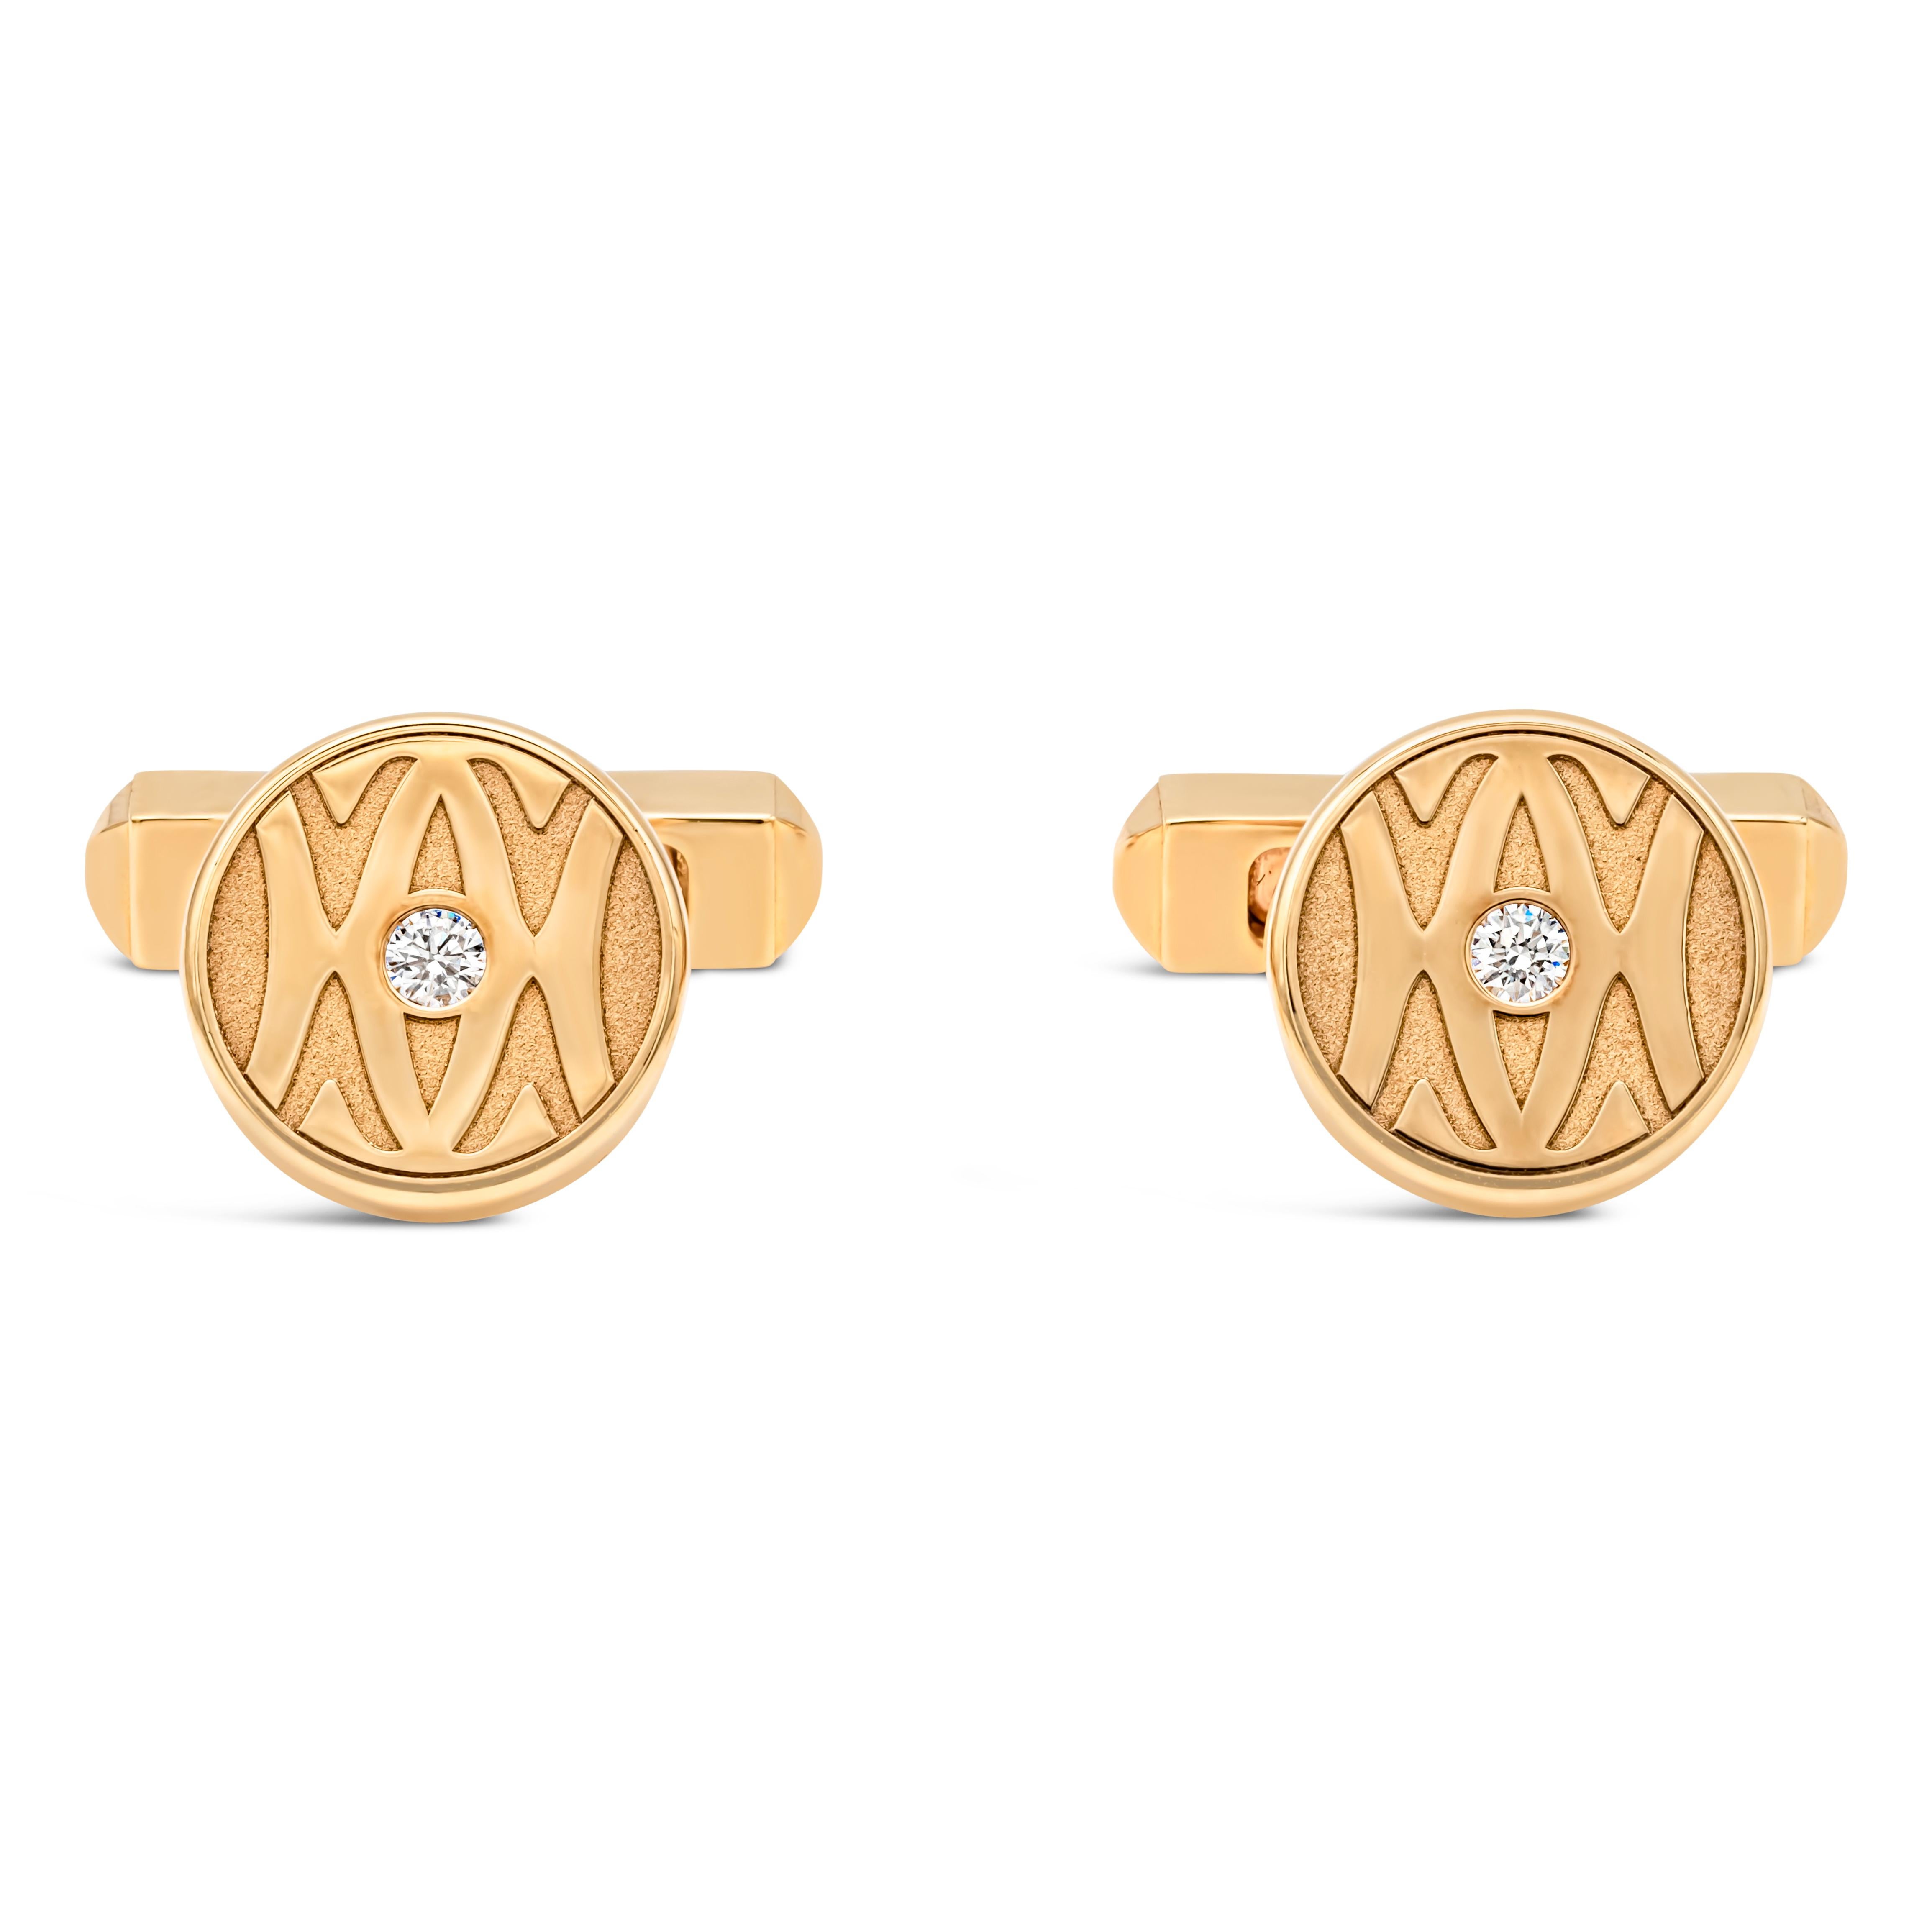 A dapper pair of cufflinks created by Cartier, featuring round brilliant cut diamonds weighing 0.14 carat total with E color and VS clarity set in the middle of an 18K yellow gold round face. These cufflinks feature the famous Cartier logo and a